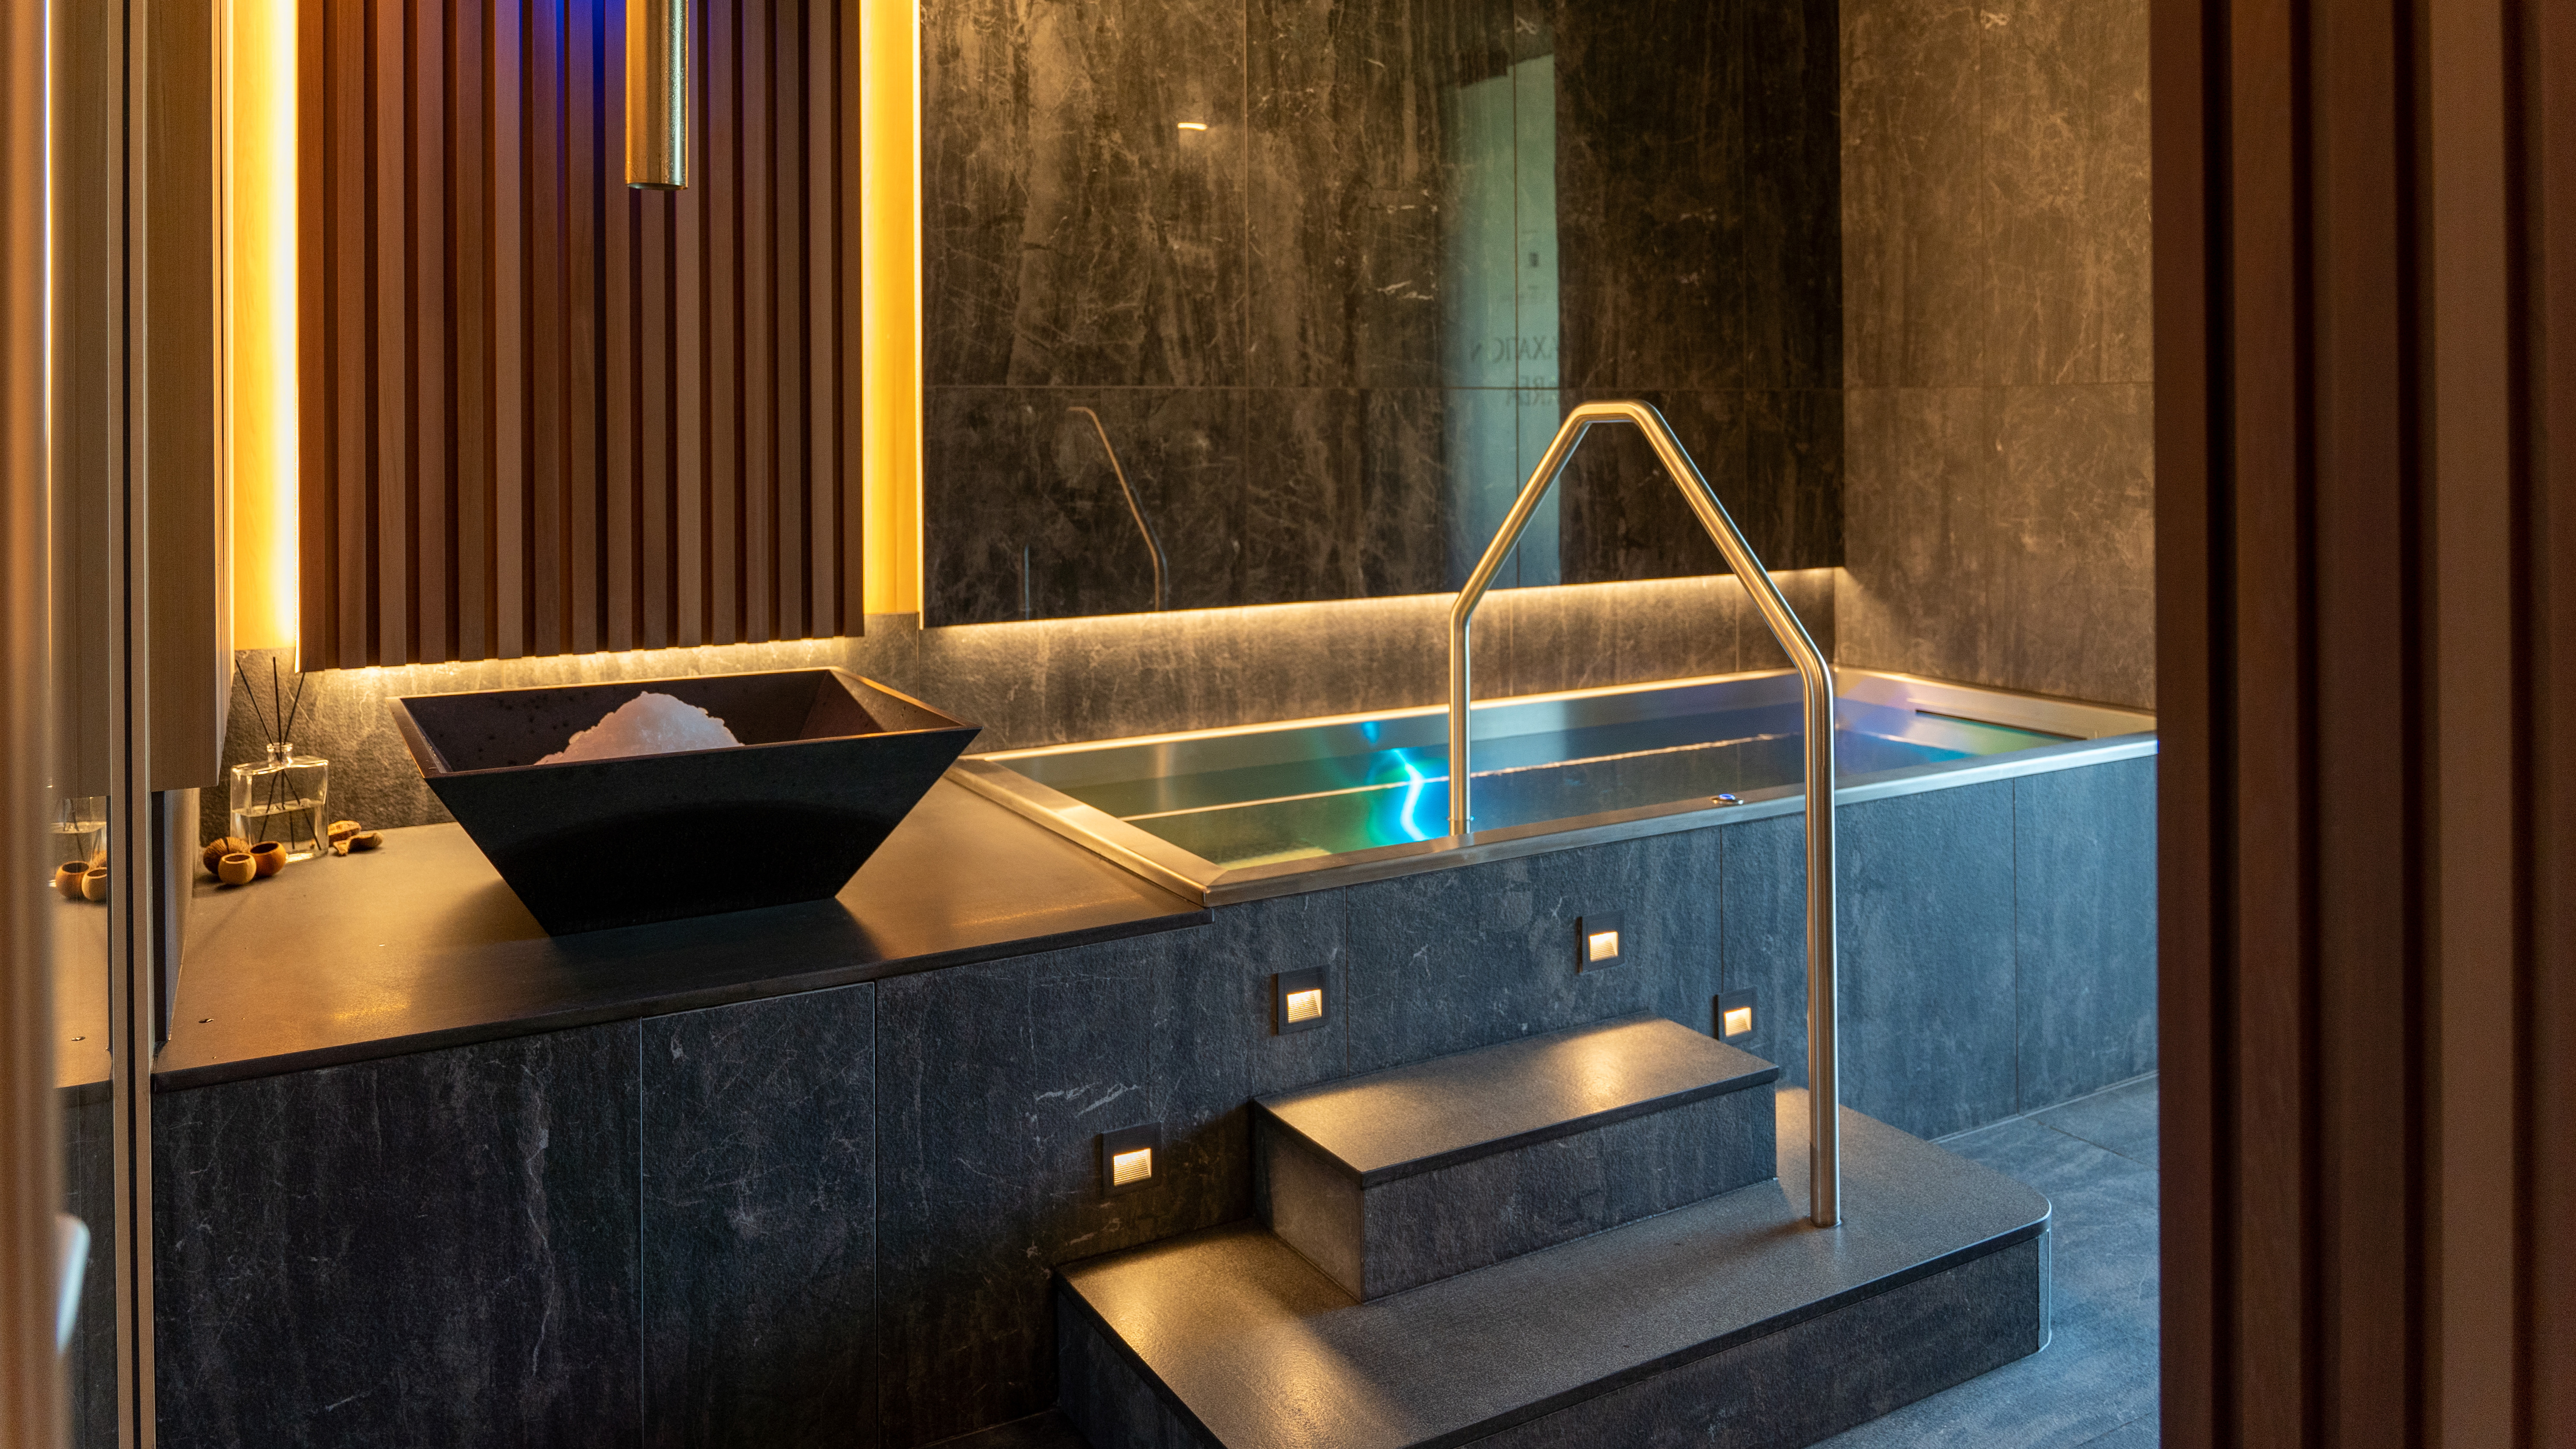 Ice-maker-and-IMAGINOX-stainless-steel-plunge-pool